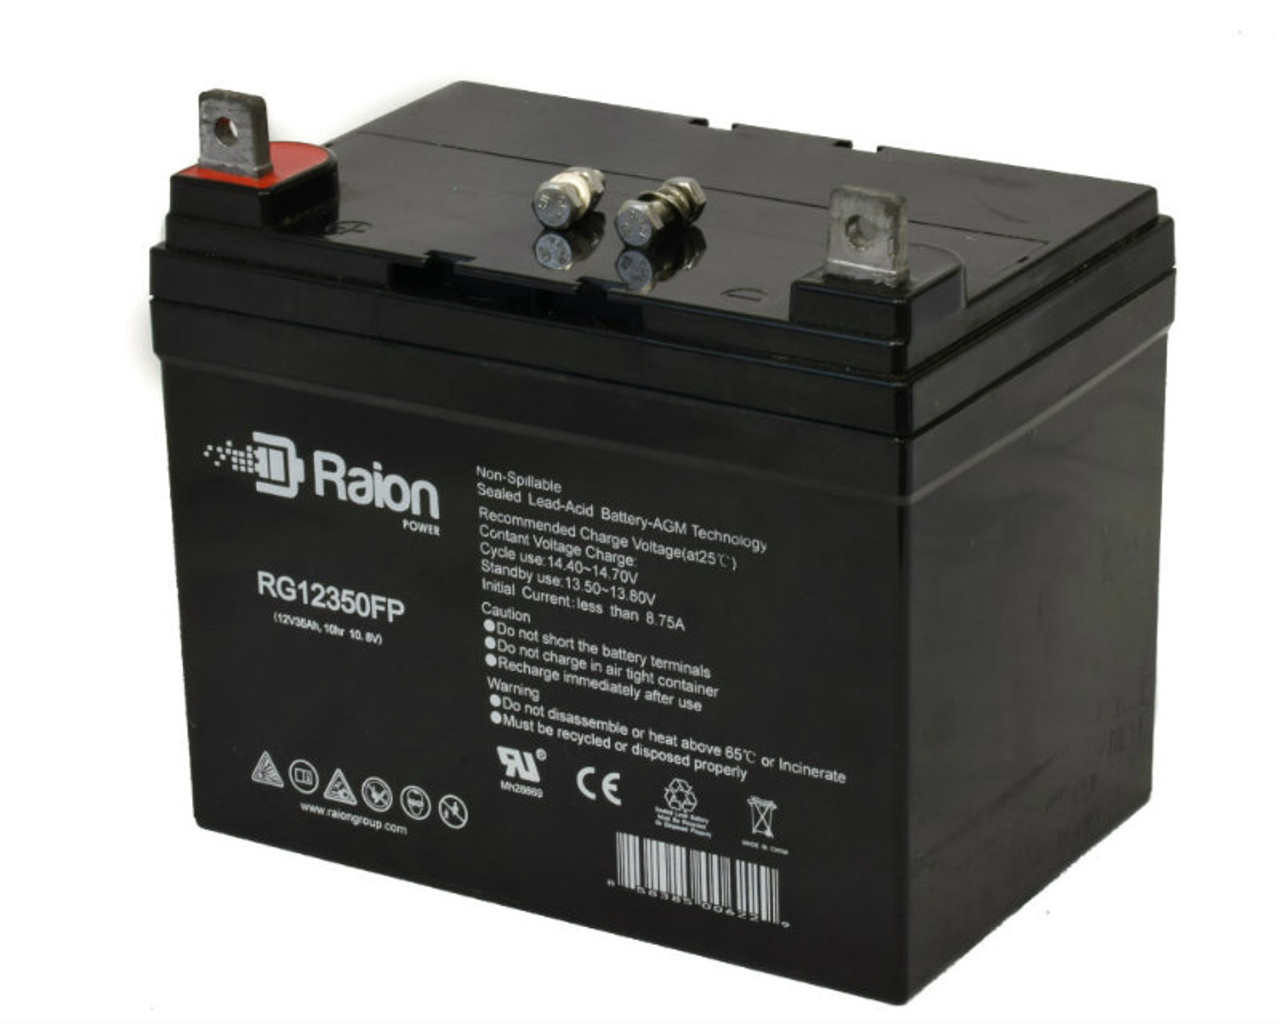 Raion Power Replacement 12V 35Ah RG12350FP Battery for Power King 1212